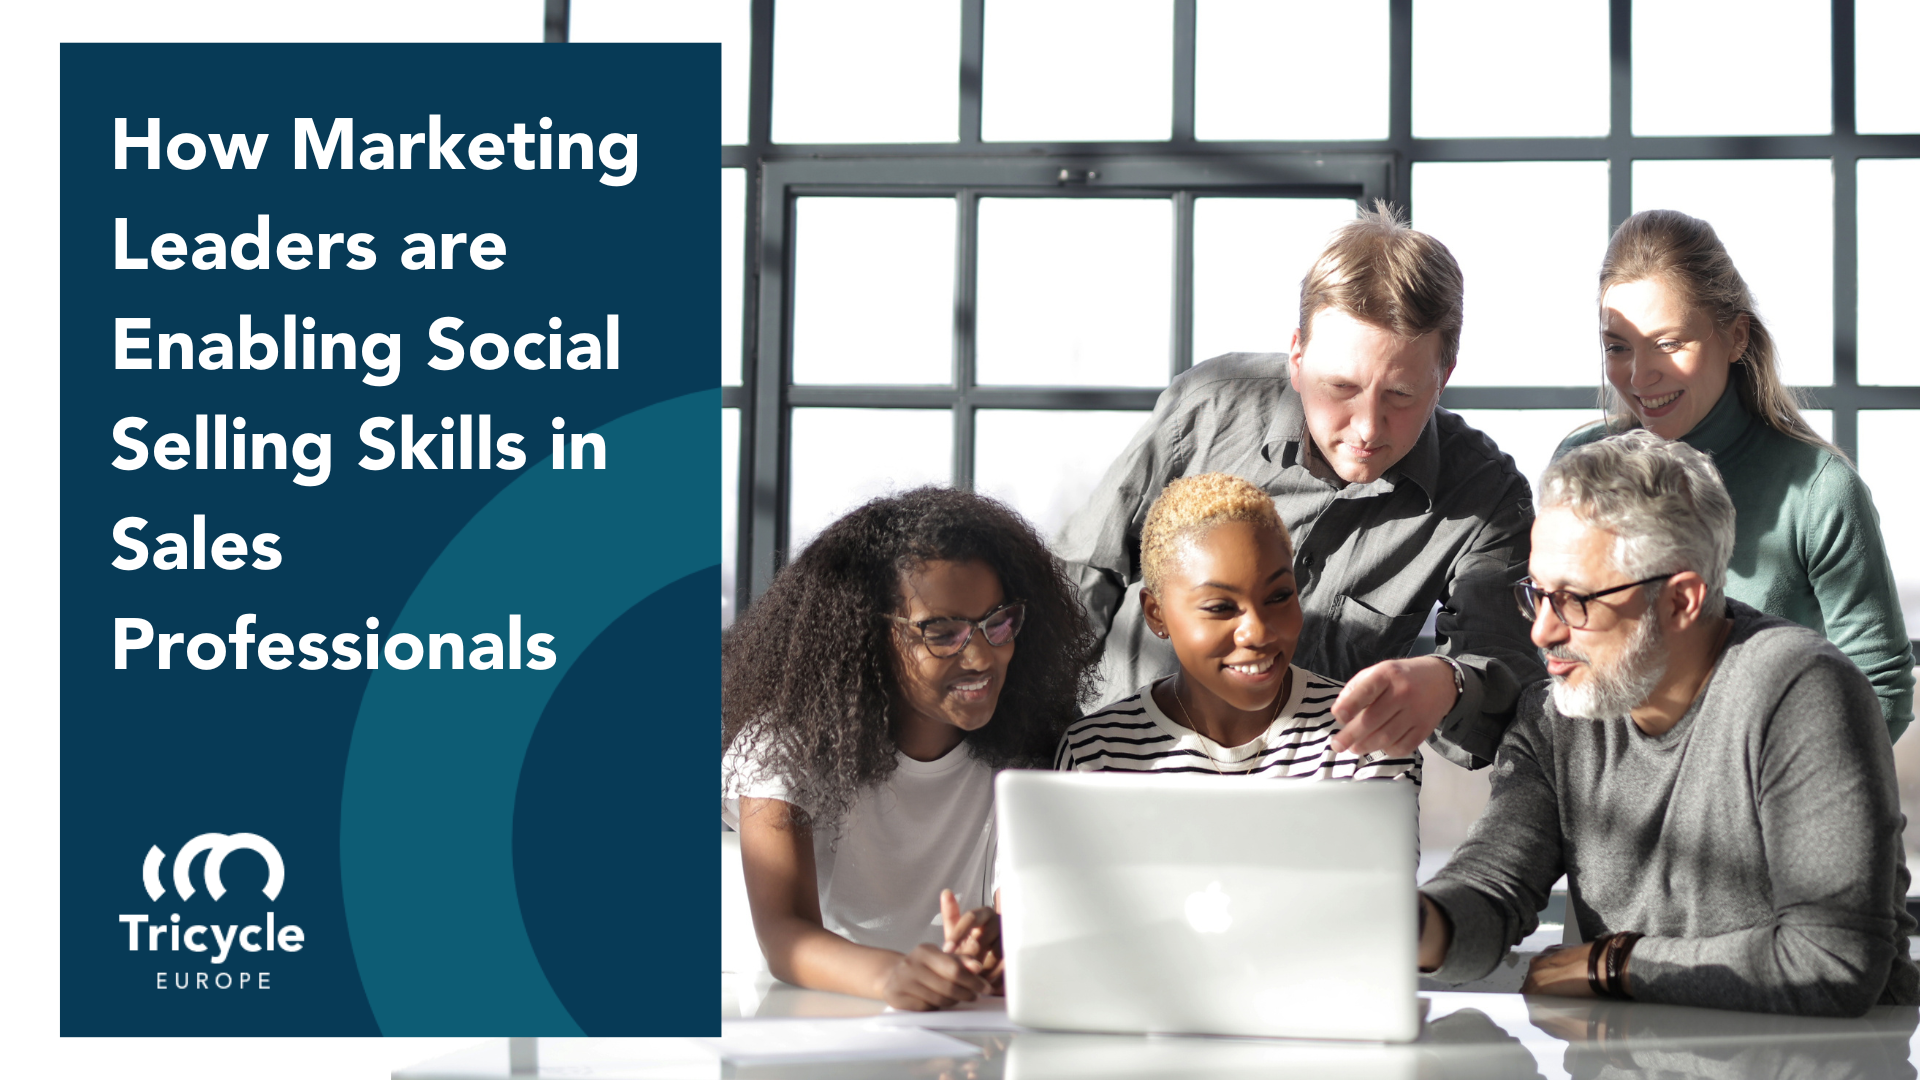 How Marketing Leaders Are Enabling Social Selling Skills in Sales Professionals